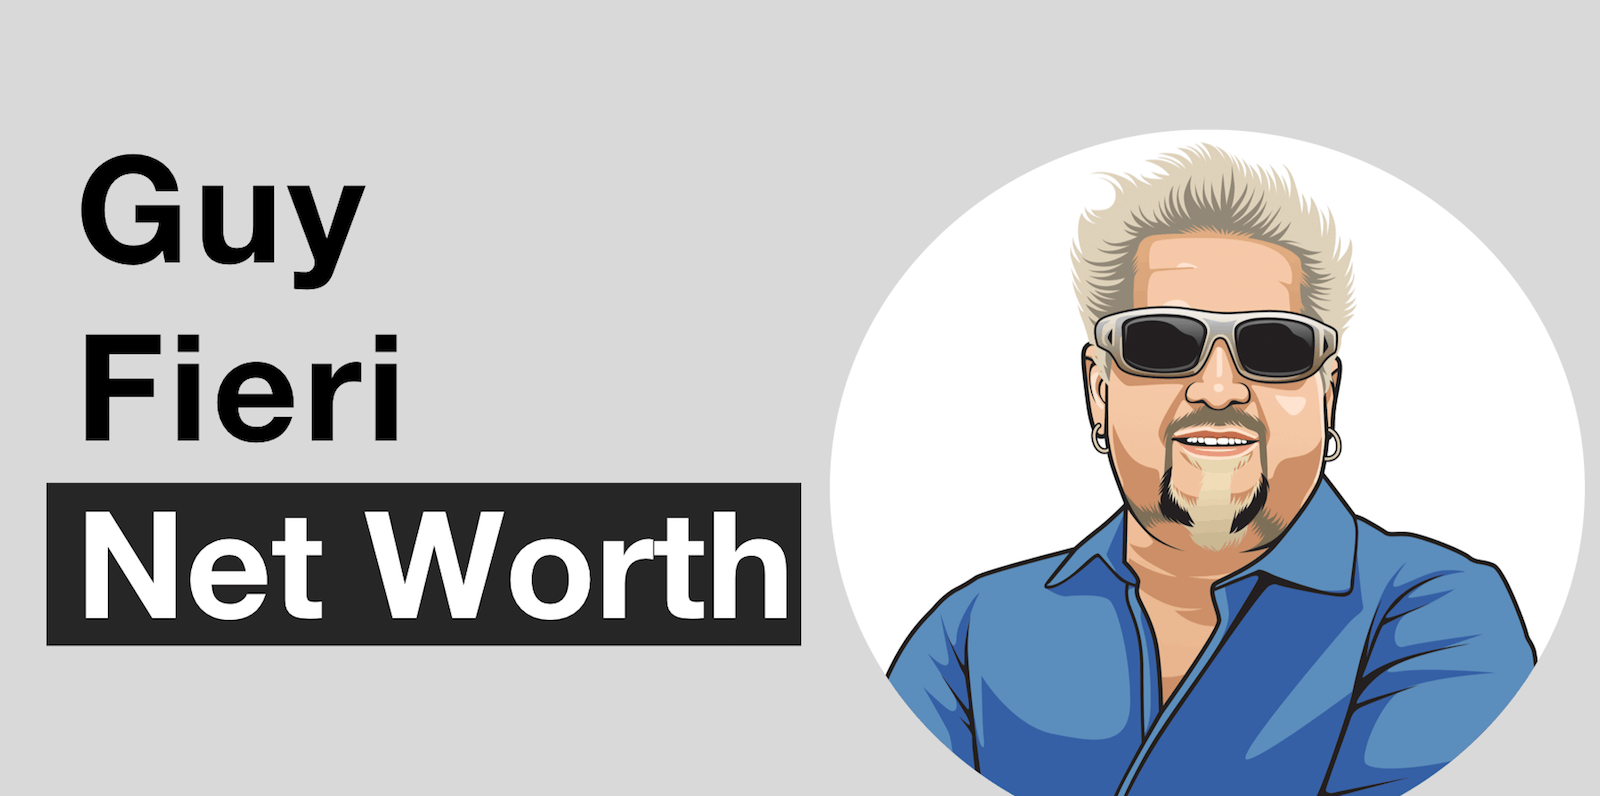 Guy Fieri Net Worth and Path to Wealth